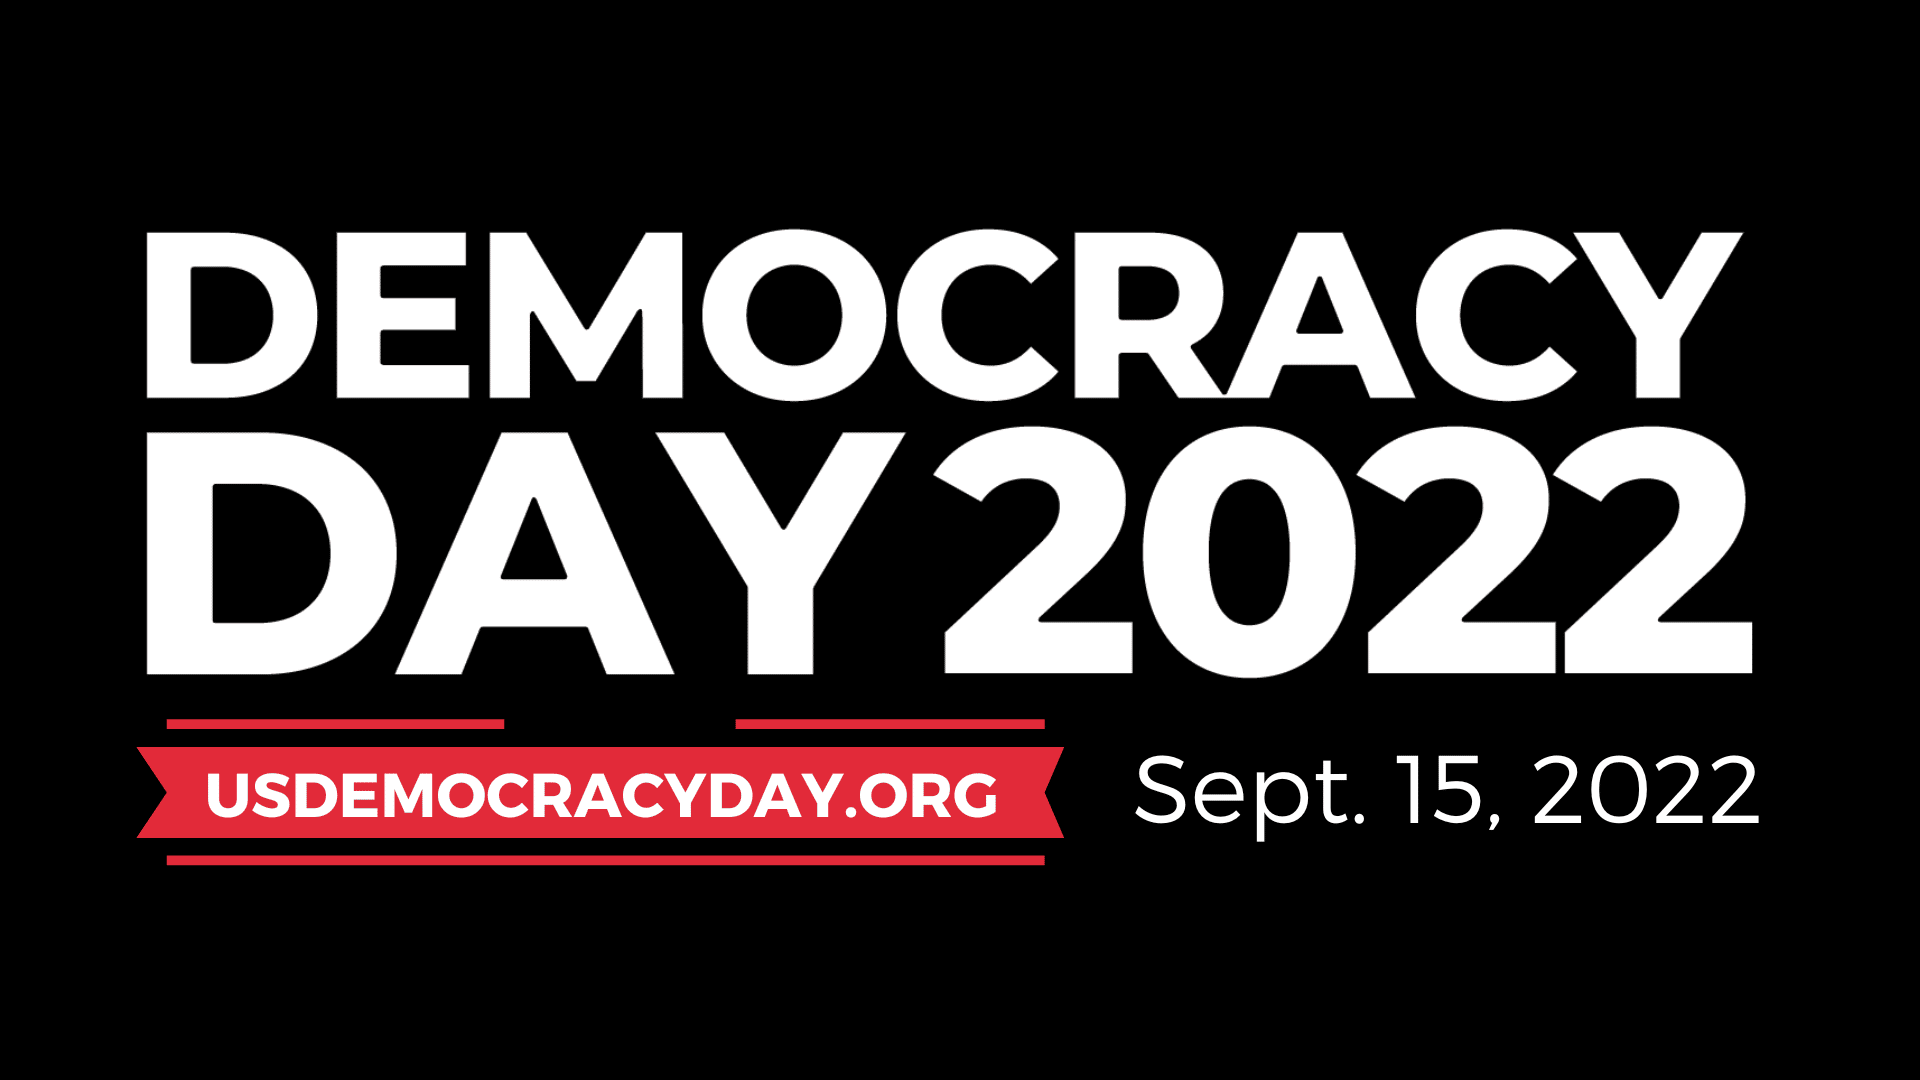 DECORATION ONLY: White text against a black background. The text reads, "DEMOCRACY DAY 2022: Sept. 15, 2022 | usdemocracyday.org"